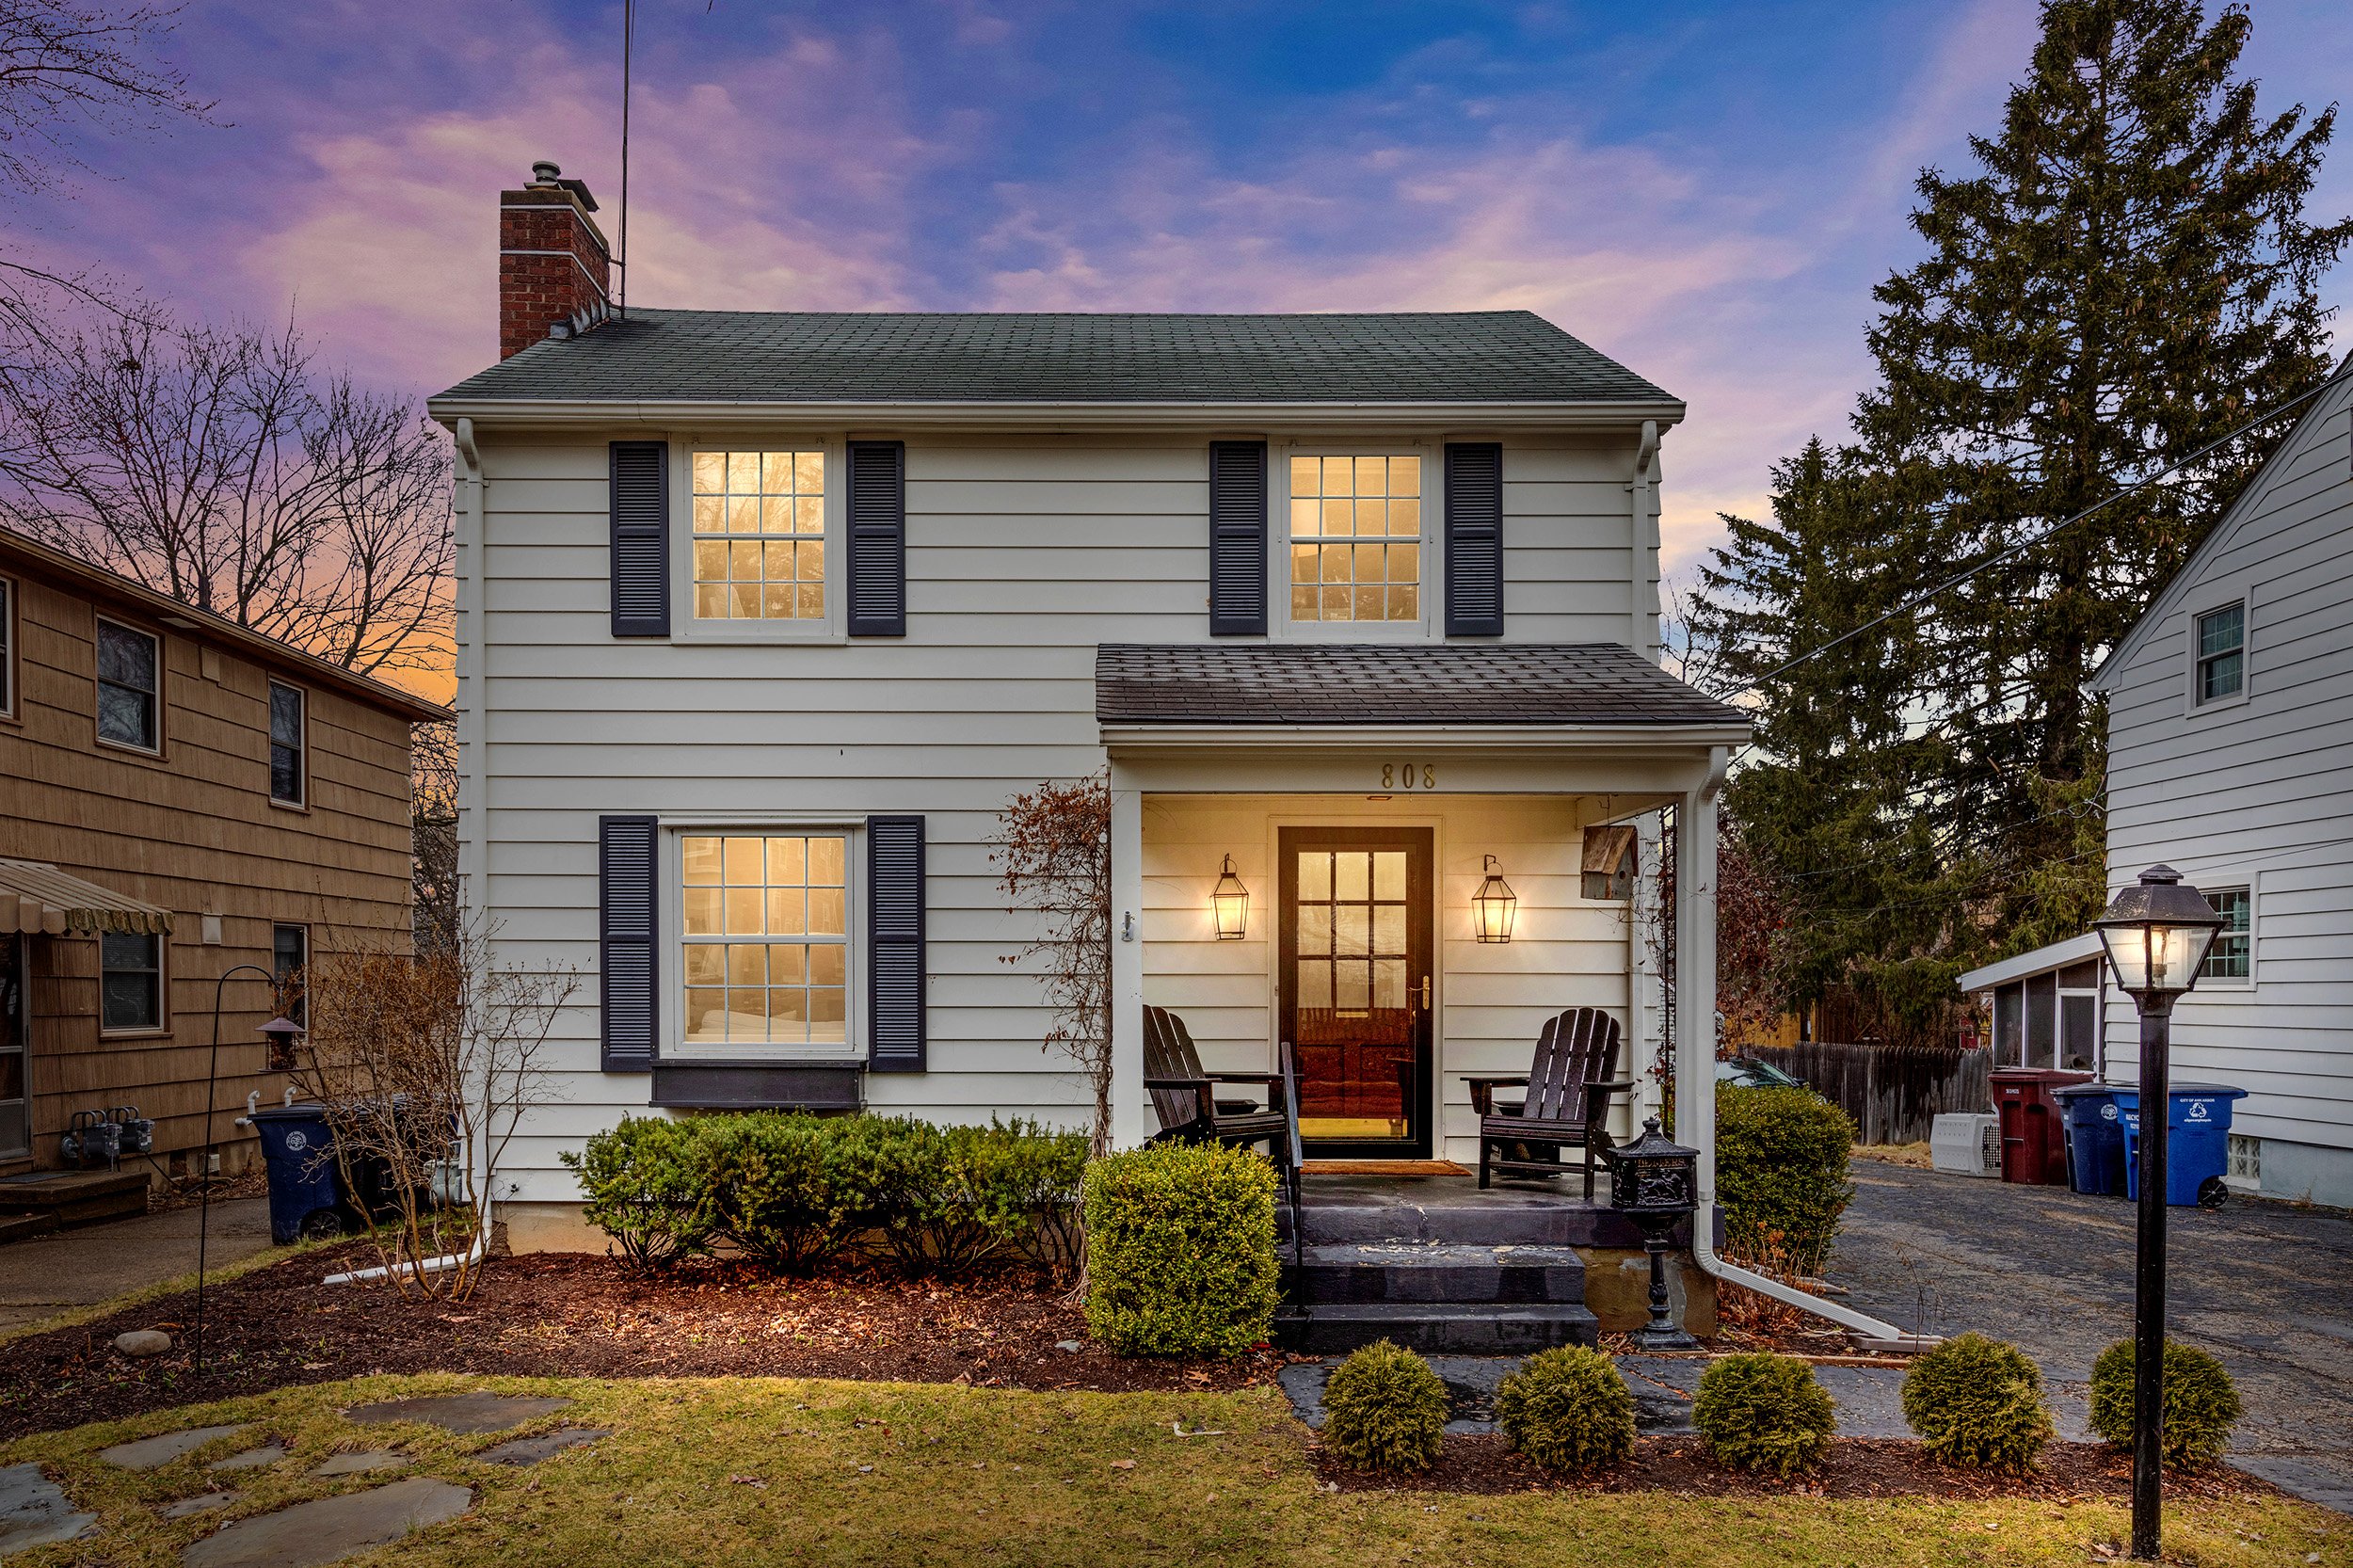  Ann Arbor Real Estate Photography - beautiful classic side entrance colonial 